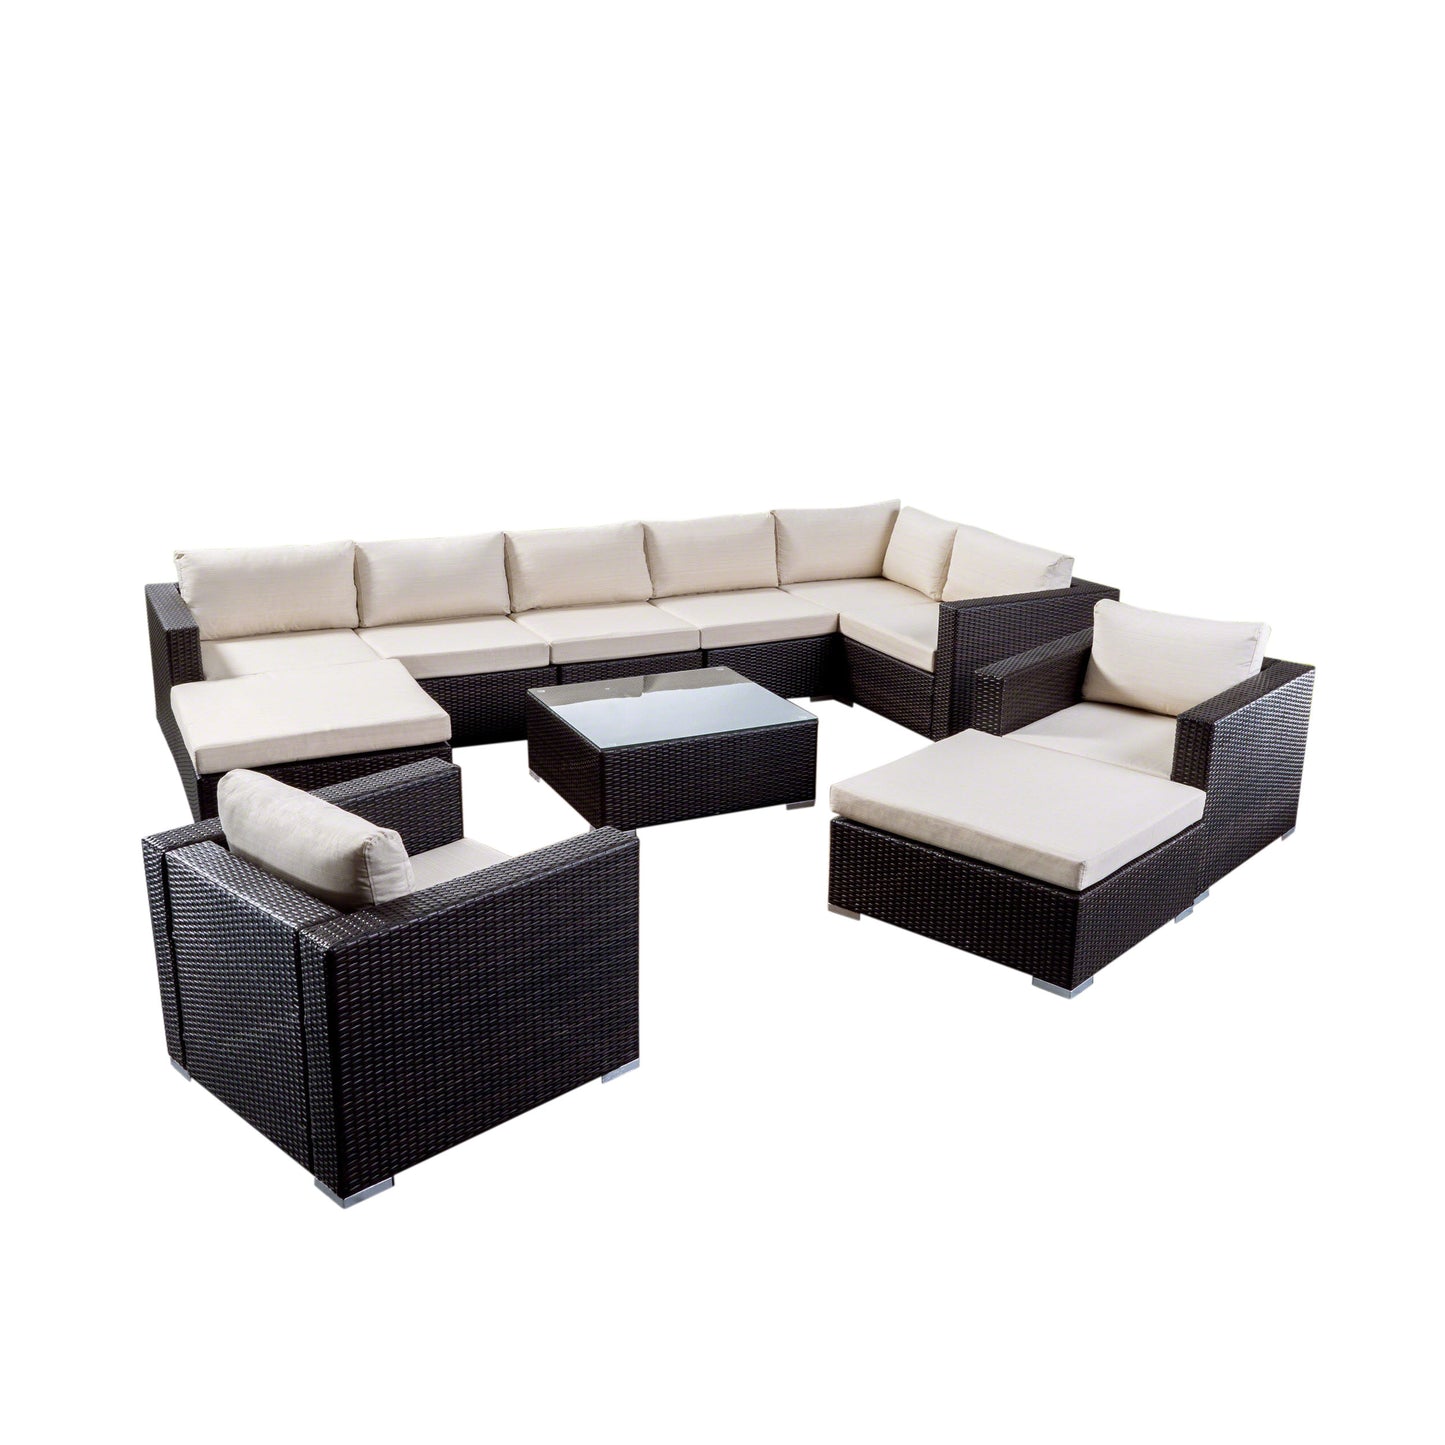 Tom Rosa Outdoor 8 Seater Wicker Sectional Sofa Set with Cushions